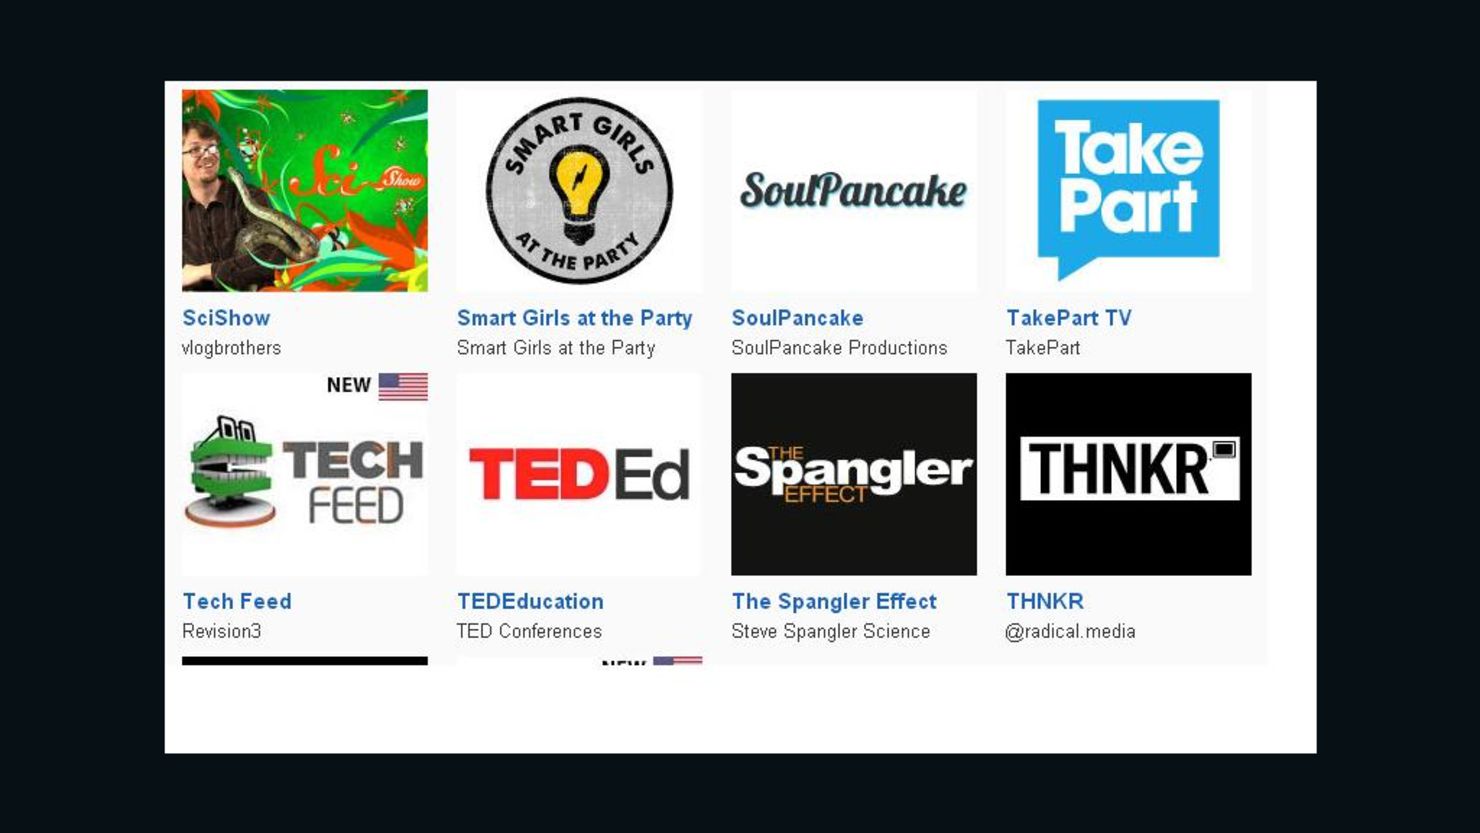 Technology and science feeds like SciShow, TED-Ed and Revision3's TechFeed are just some of YouTube's original channels.